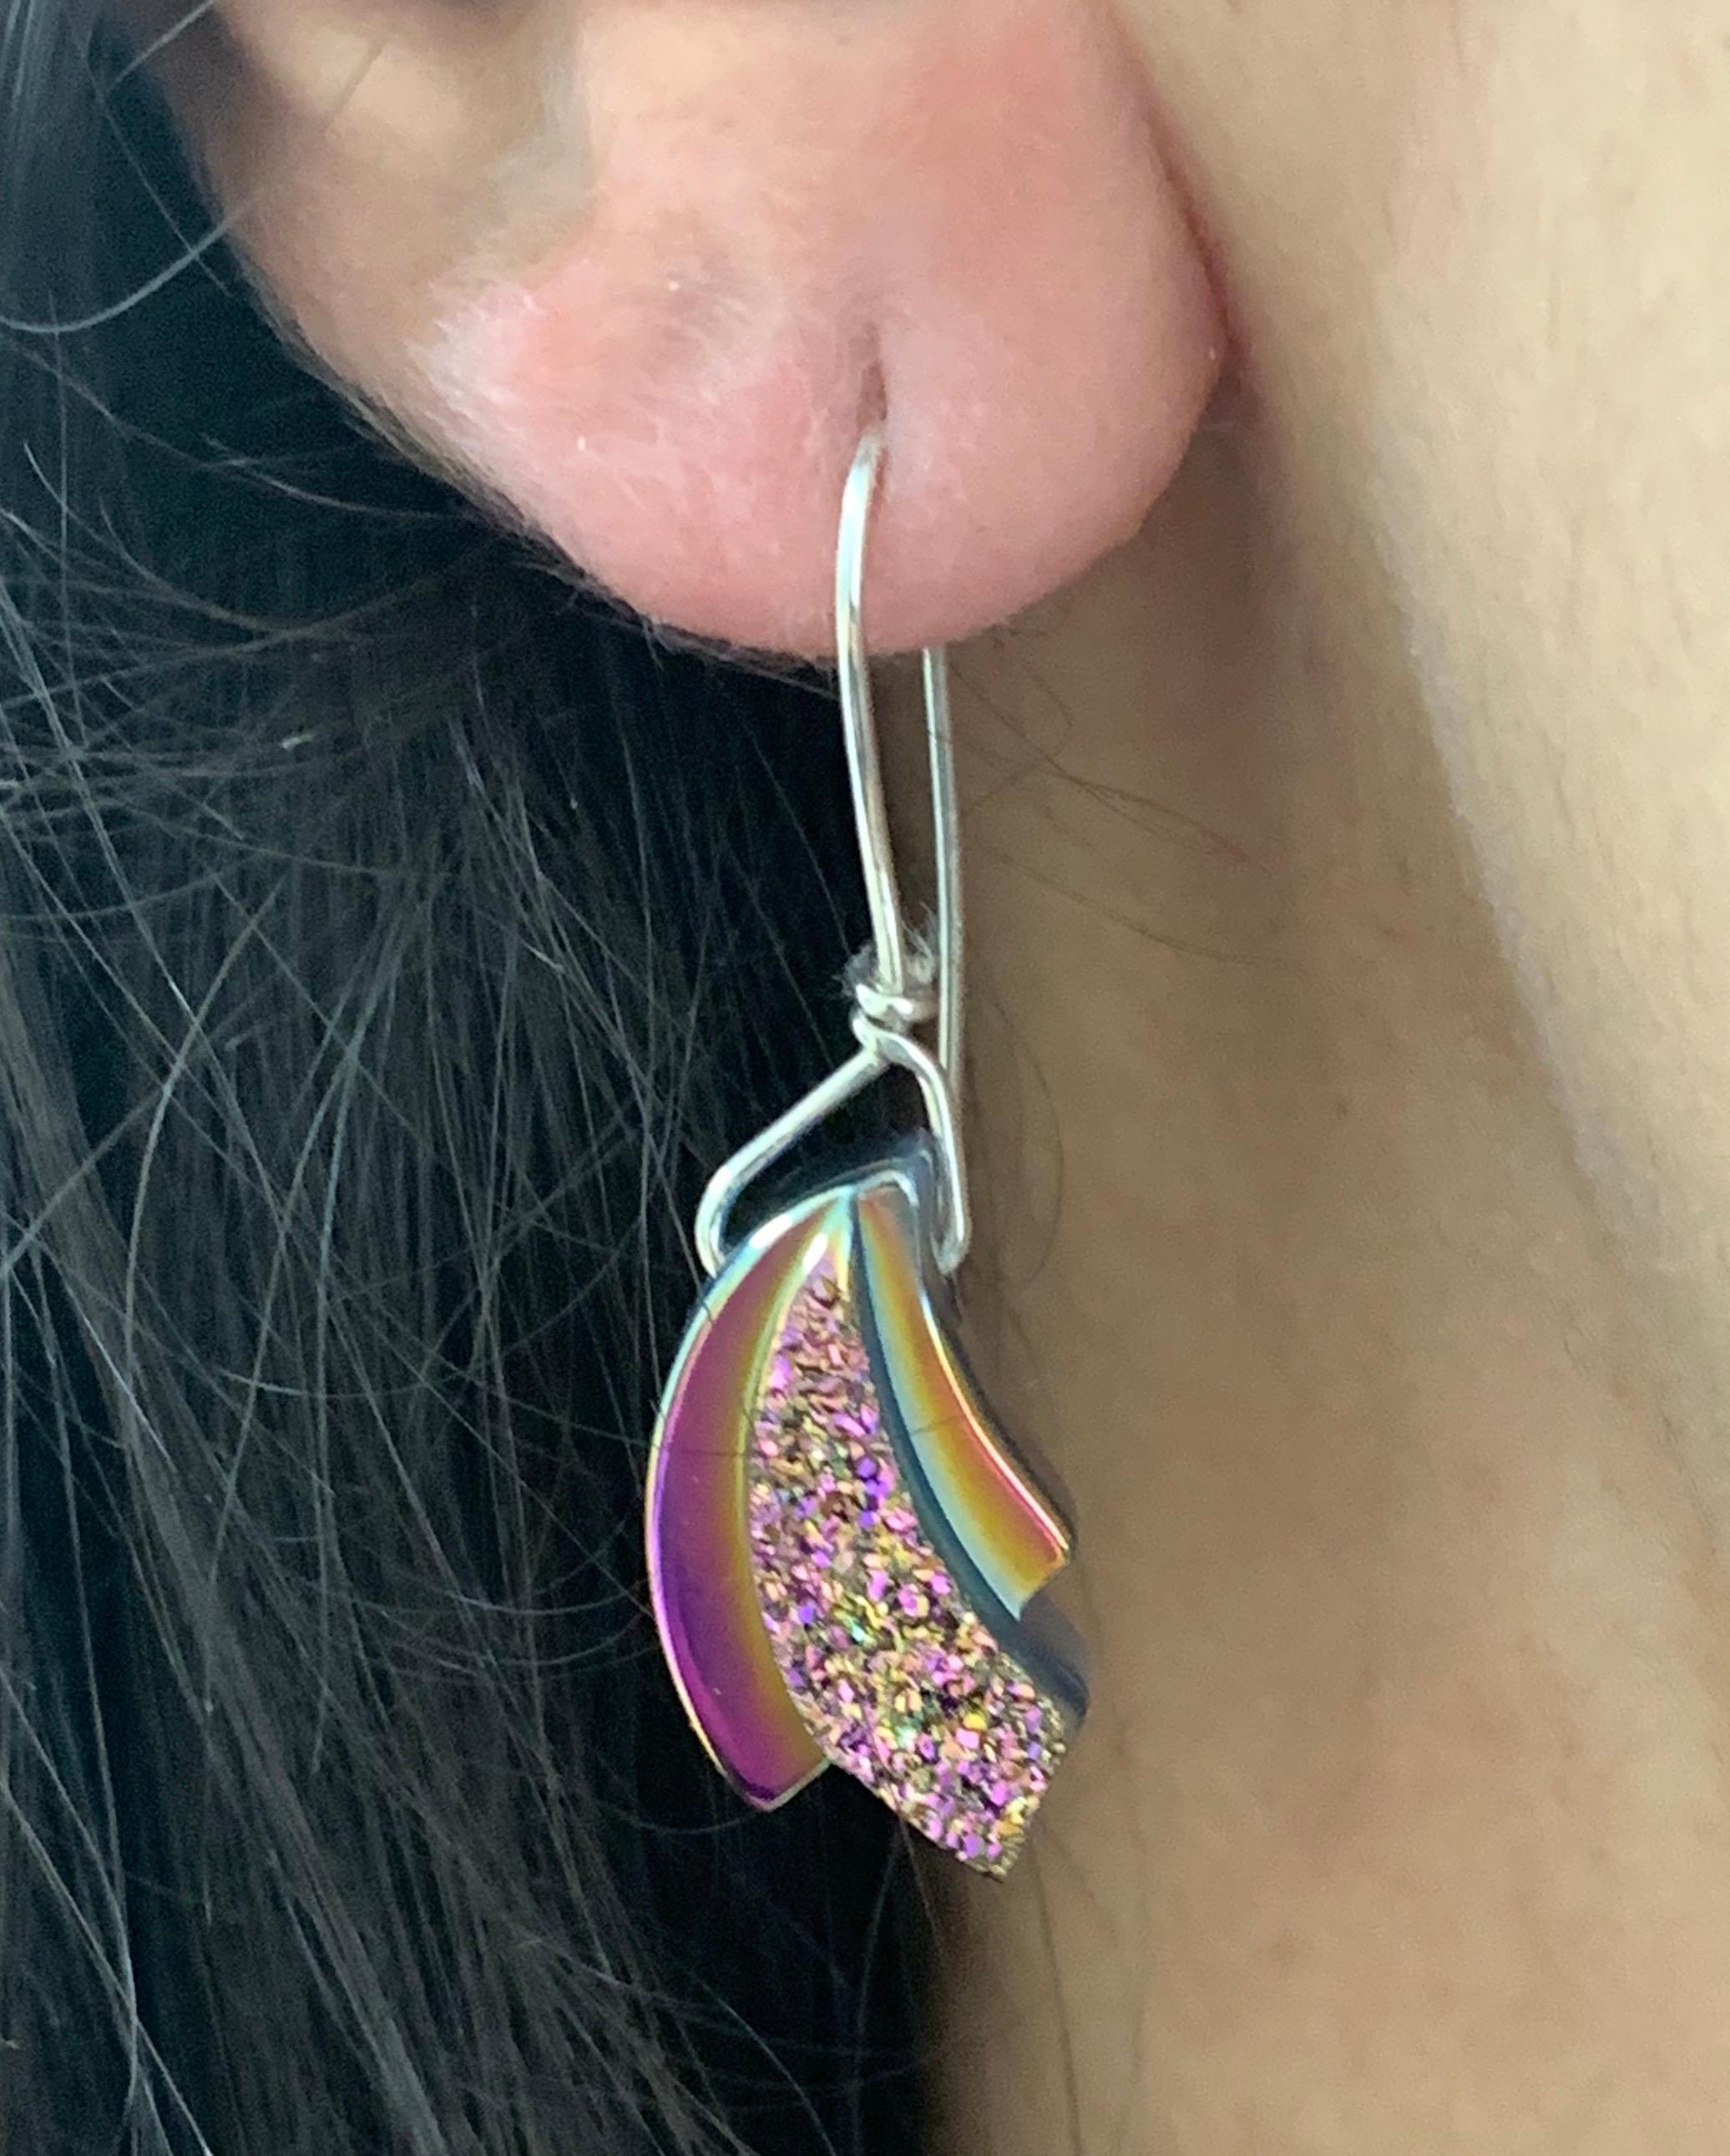 A stunning piece, these Druzy stones are a perfect match in quality and color. These earrings will have all eyes on you!

Material: Sterling Silver
Center Stone Details: Two Rainbow Titanium Druzys